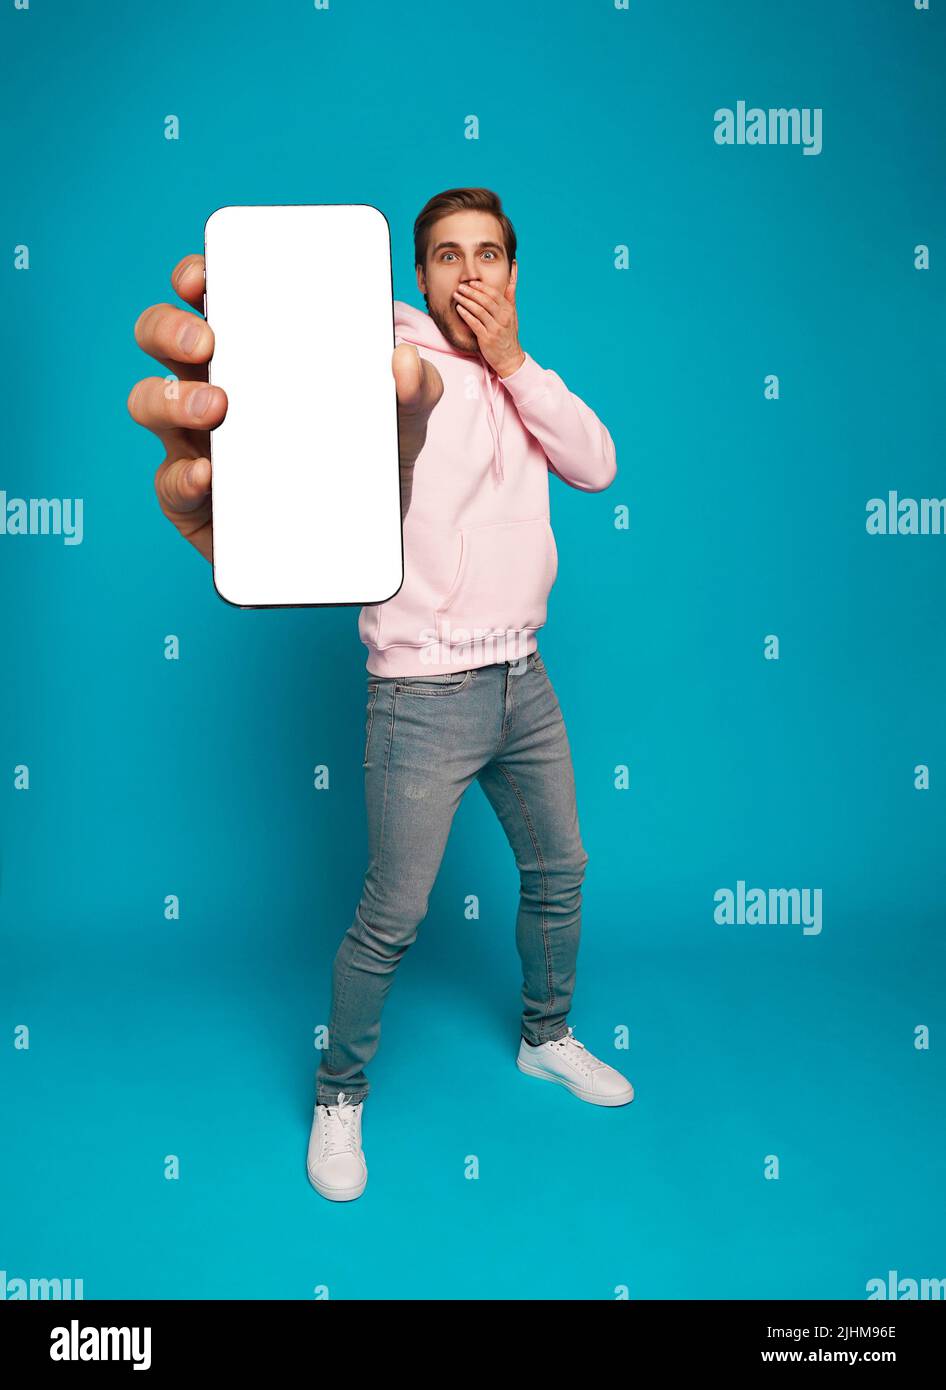 Mobile App Advertisement. Handsome Excited Man Showing Pointing At Empty Smartphone Screen Posing Over Light Blue Studio Background, Smiling To Camera Stock Photo